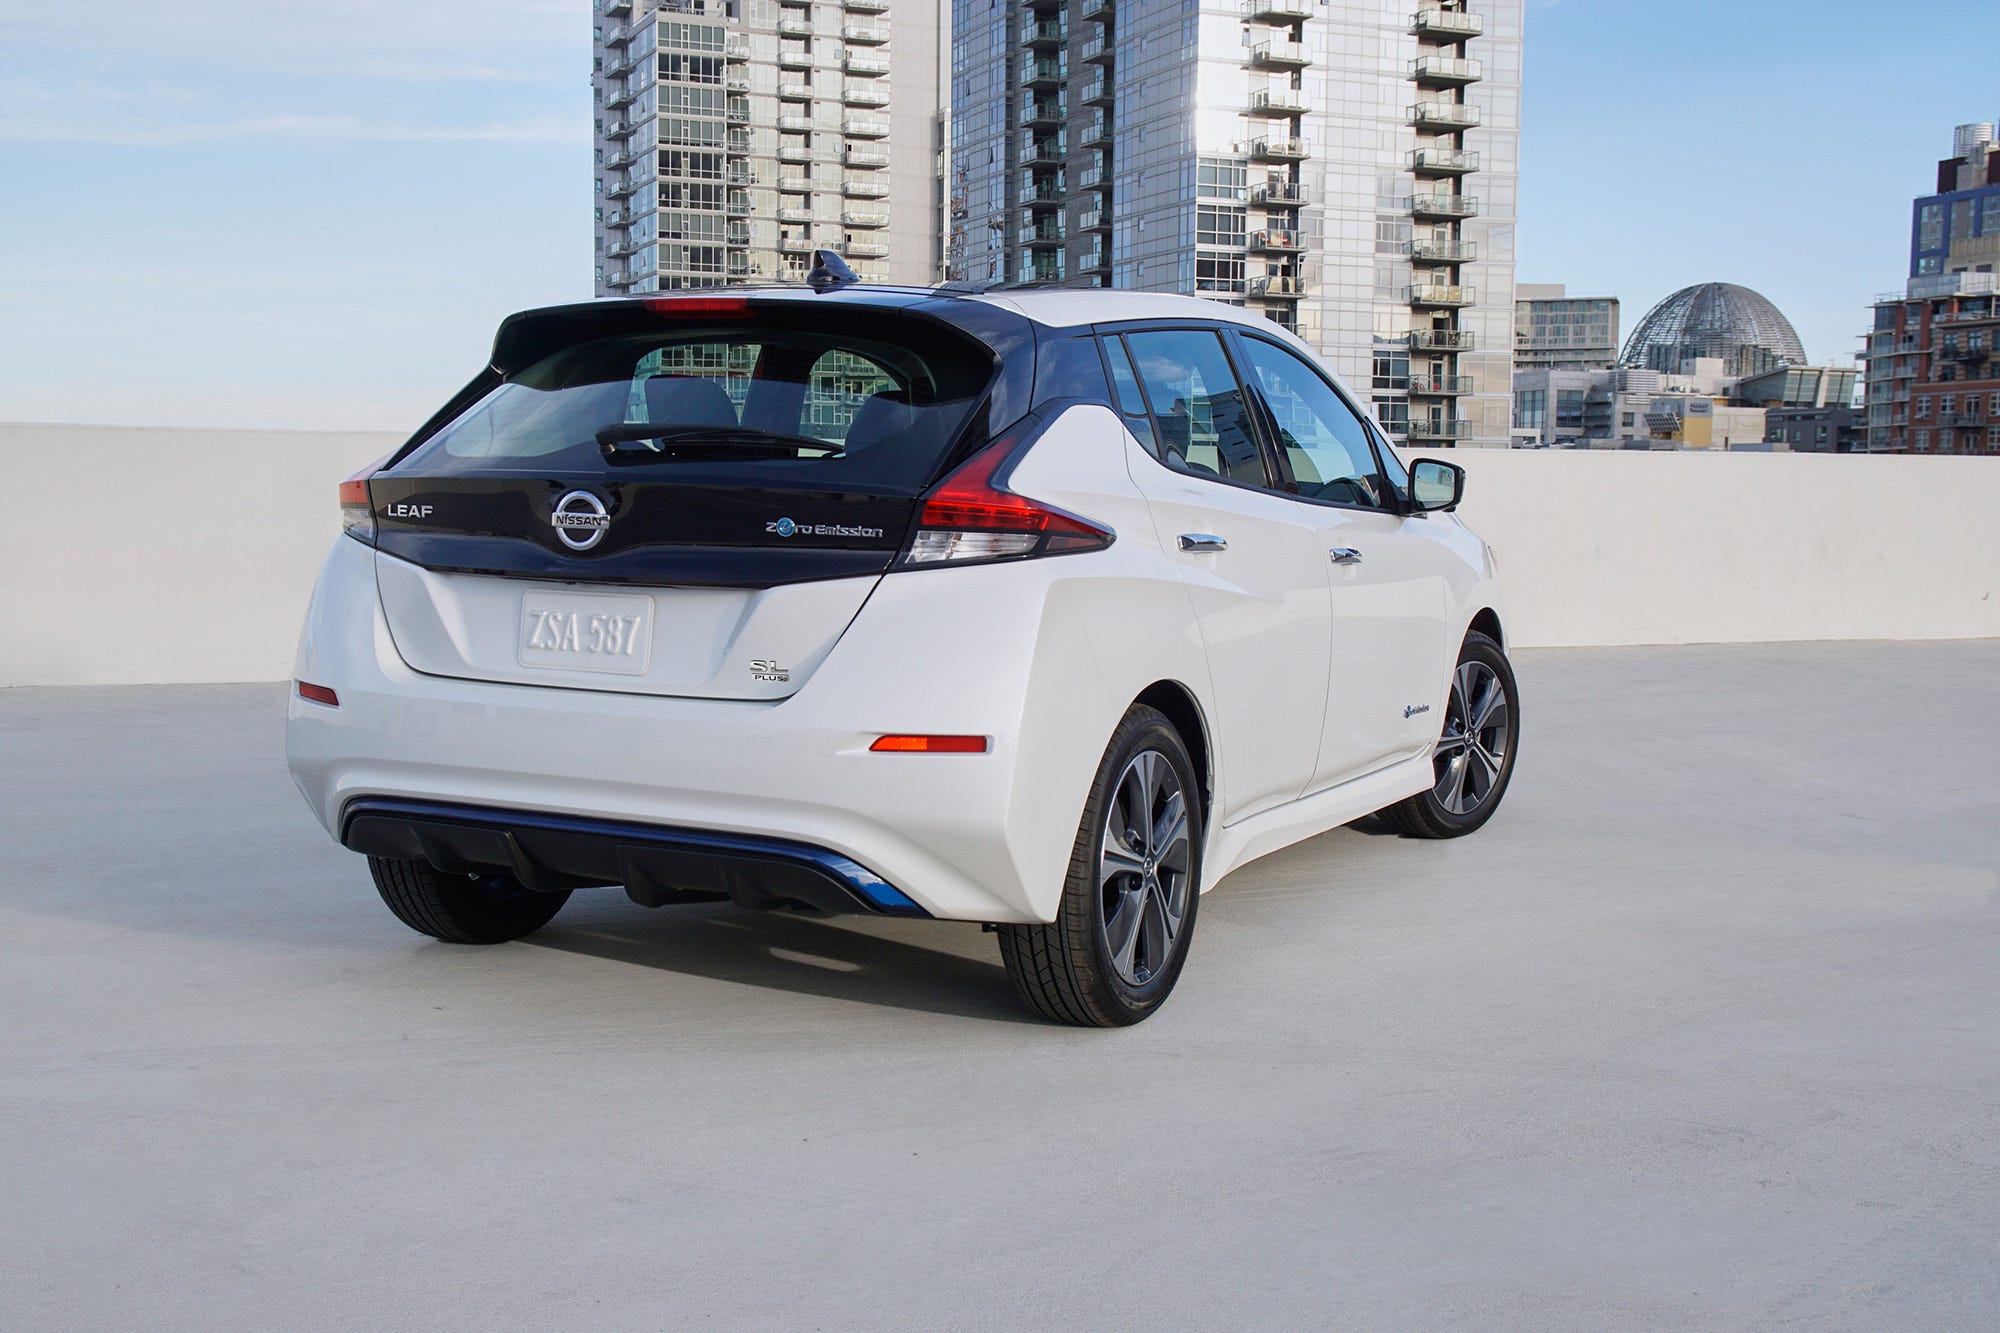 Nissan Leaf: The electric car you never read about